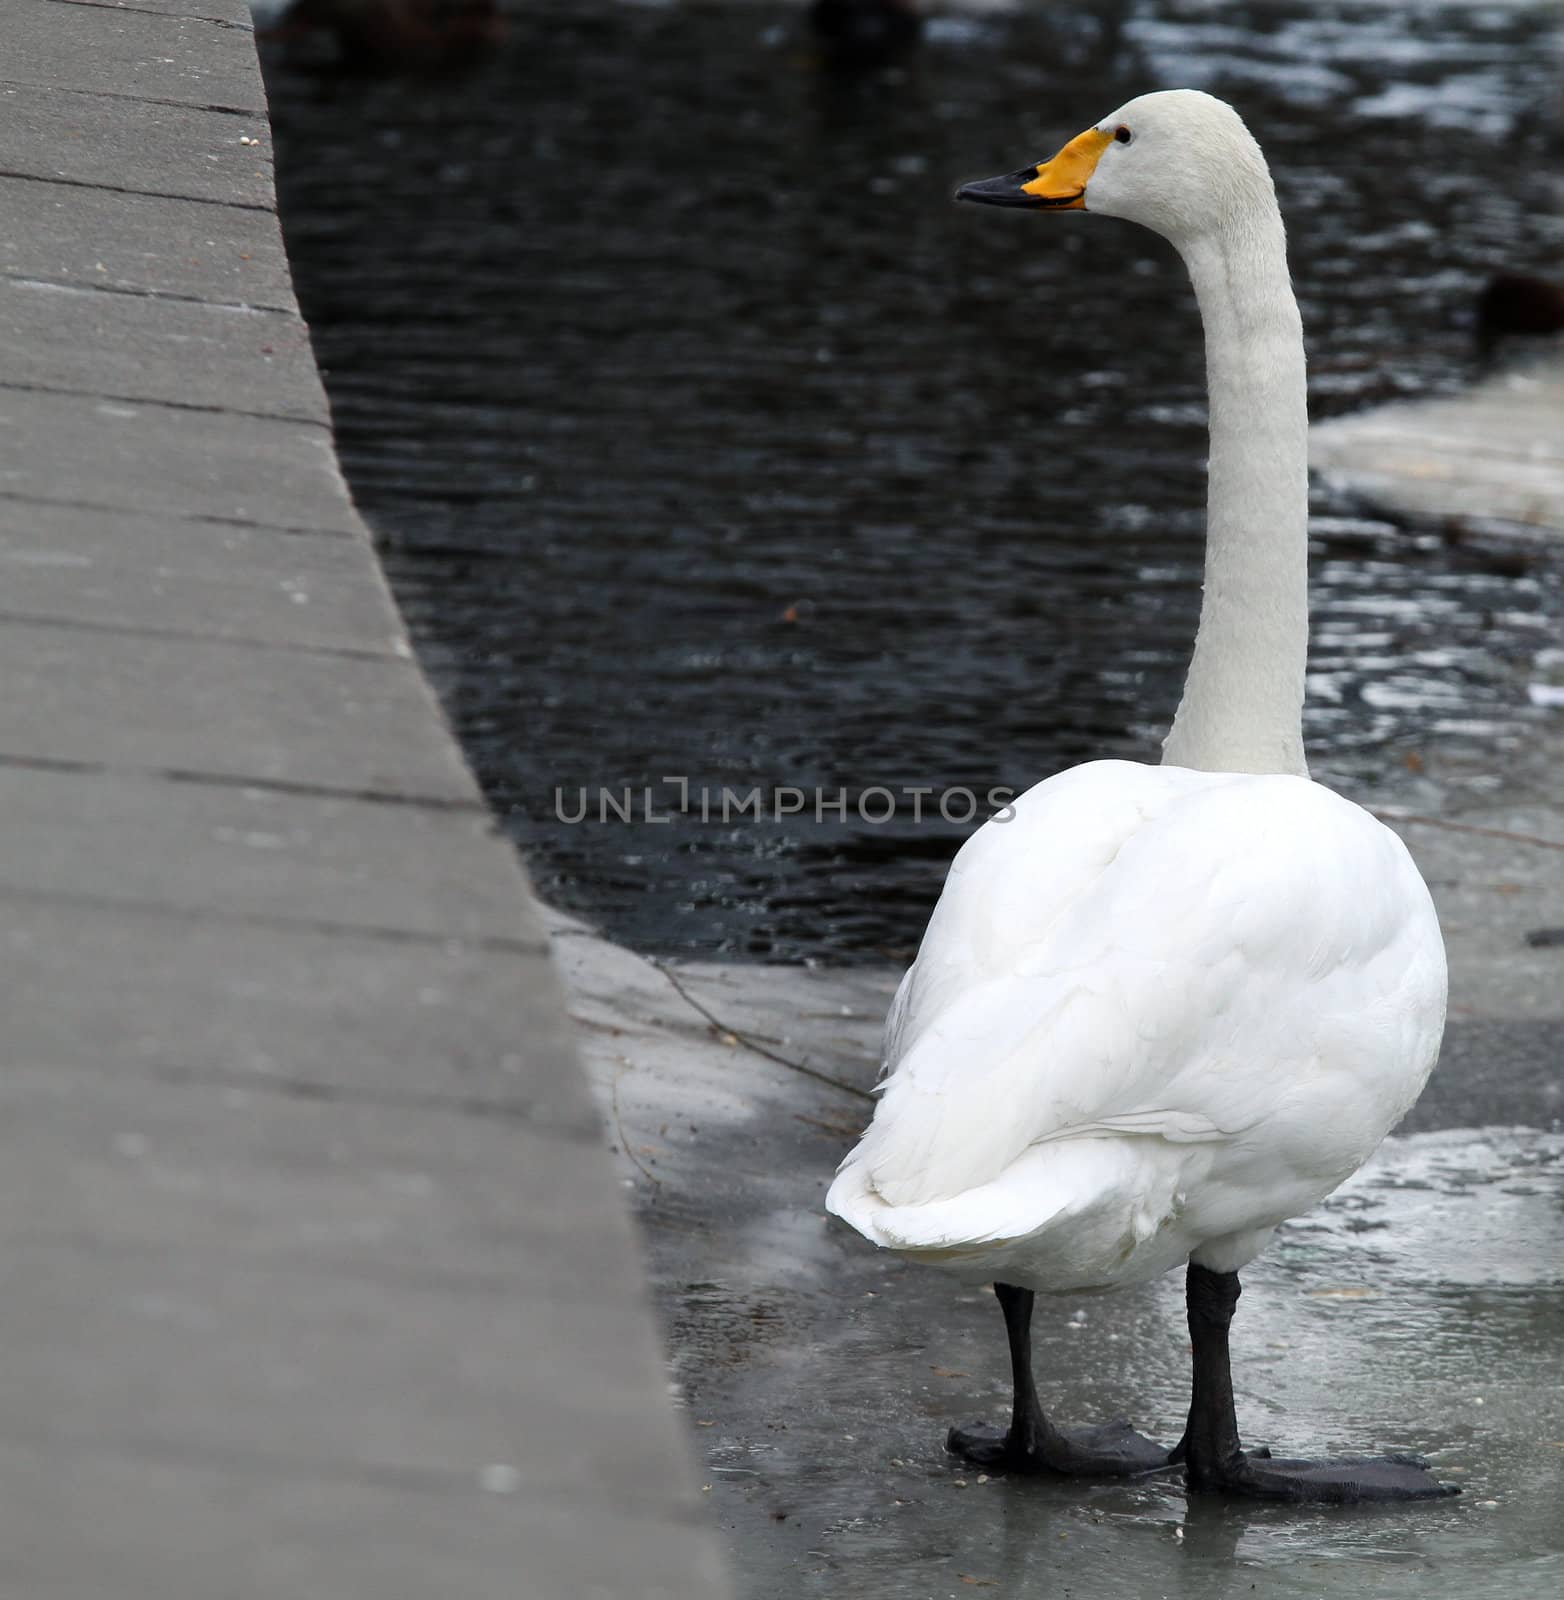 A swan stands by on the ice, thinking